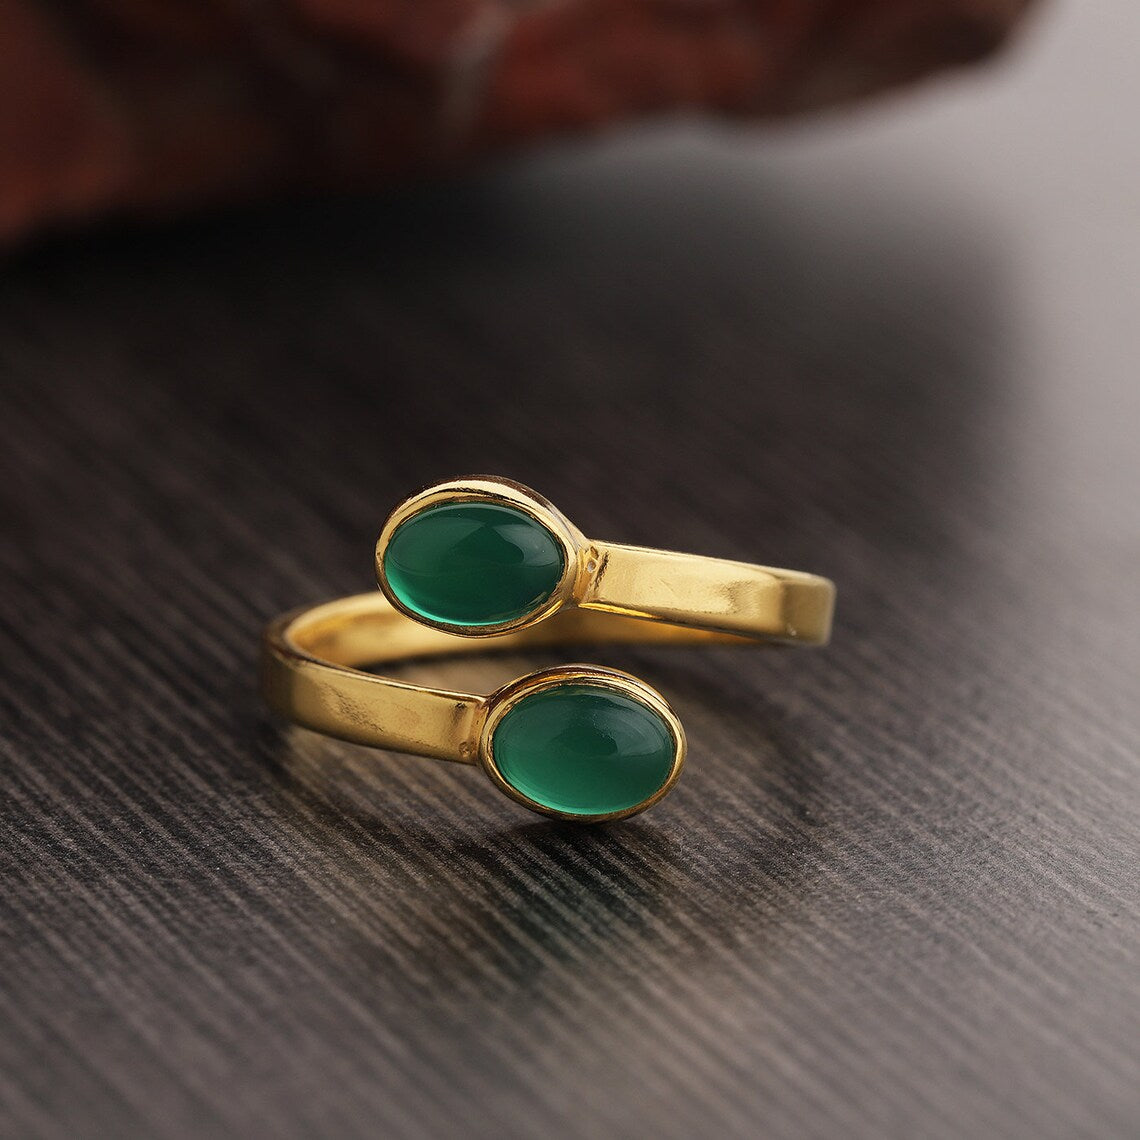 Green Onyx Ring Gold, Solitaire Stone Ring, Green Stone Ring, Stackable Ring, Oval Stone Ring, Sterling Silver Gold Ring, Gift For Her,